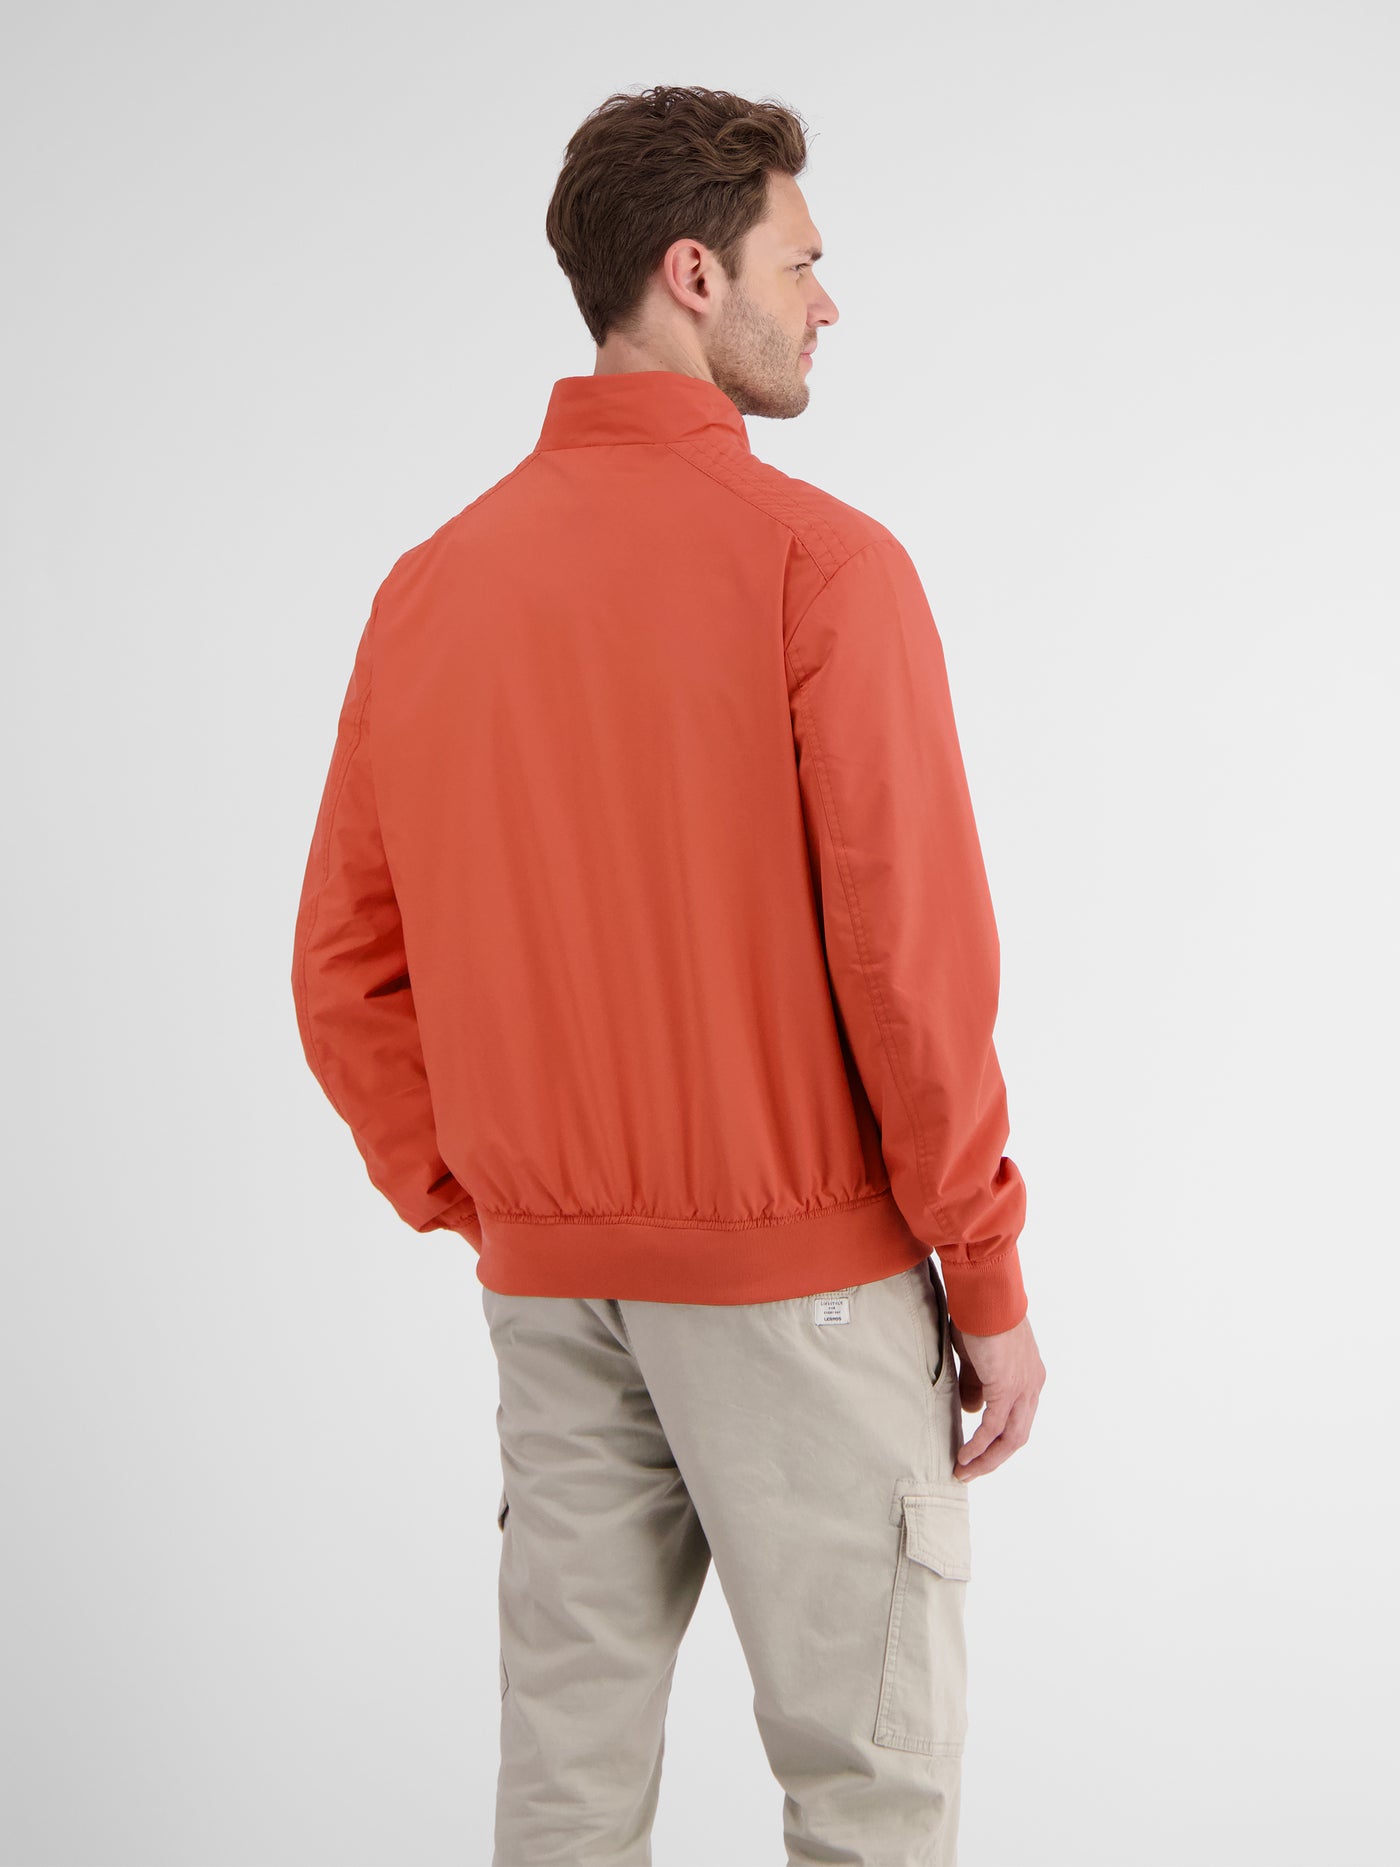 Breathable blouson jacket, water and wind repellent